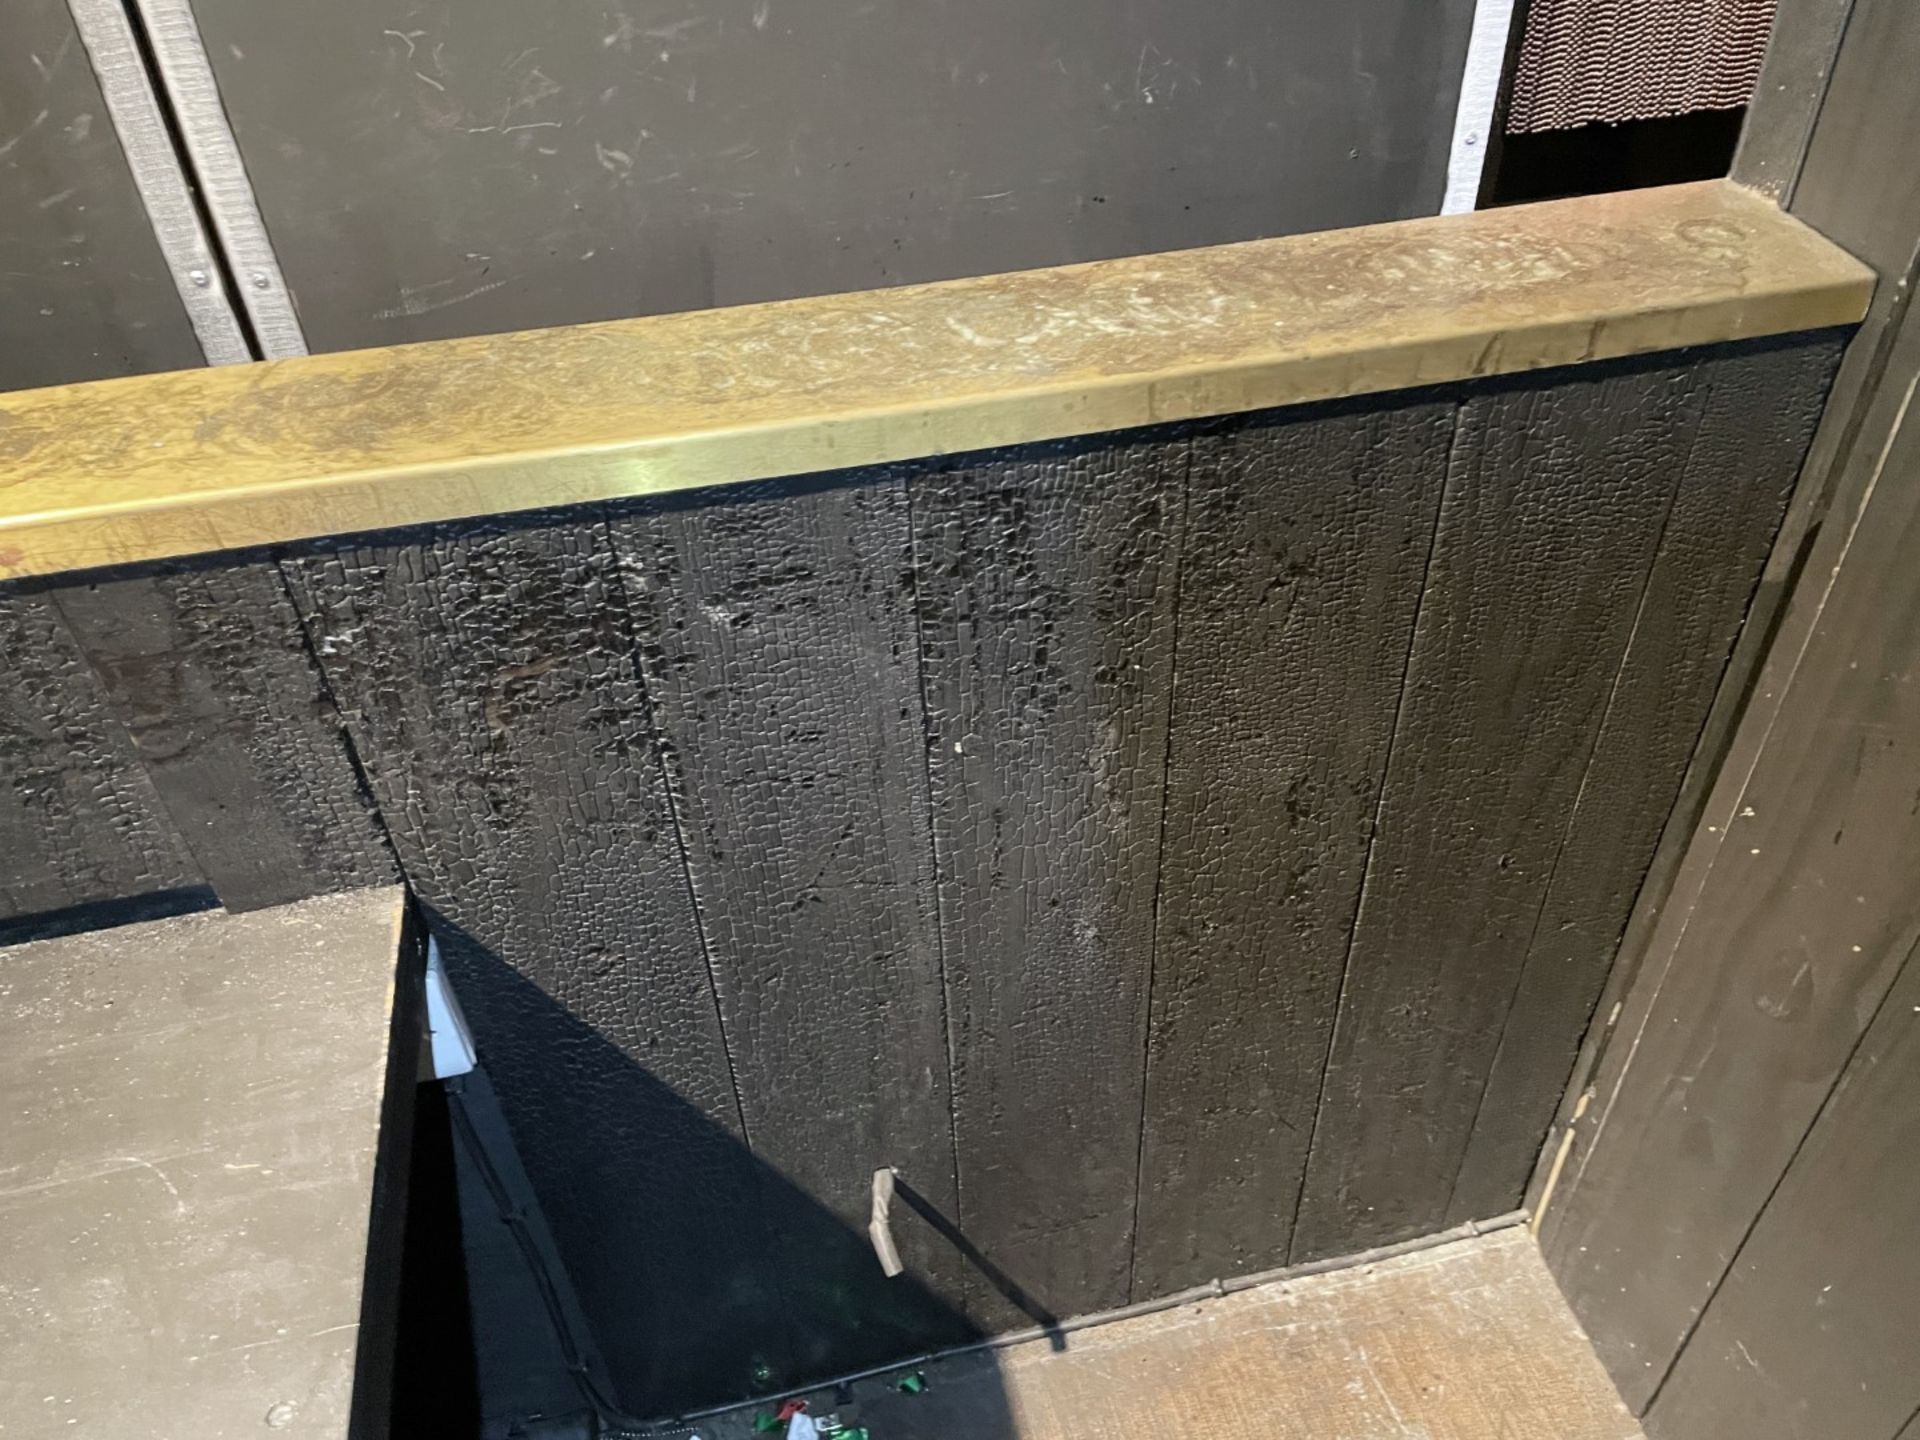 1 x Bespoke DJ Booth Area With a Burnt Charcoal Wood Finish and a Brass Counter Surround - Image 9 of 13